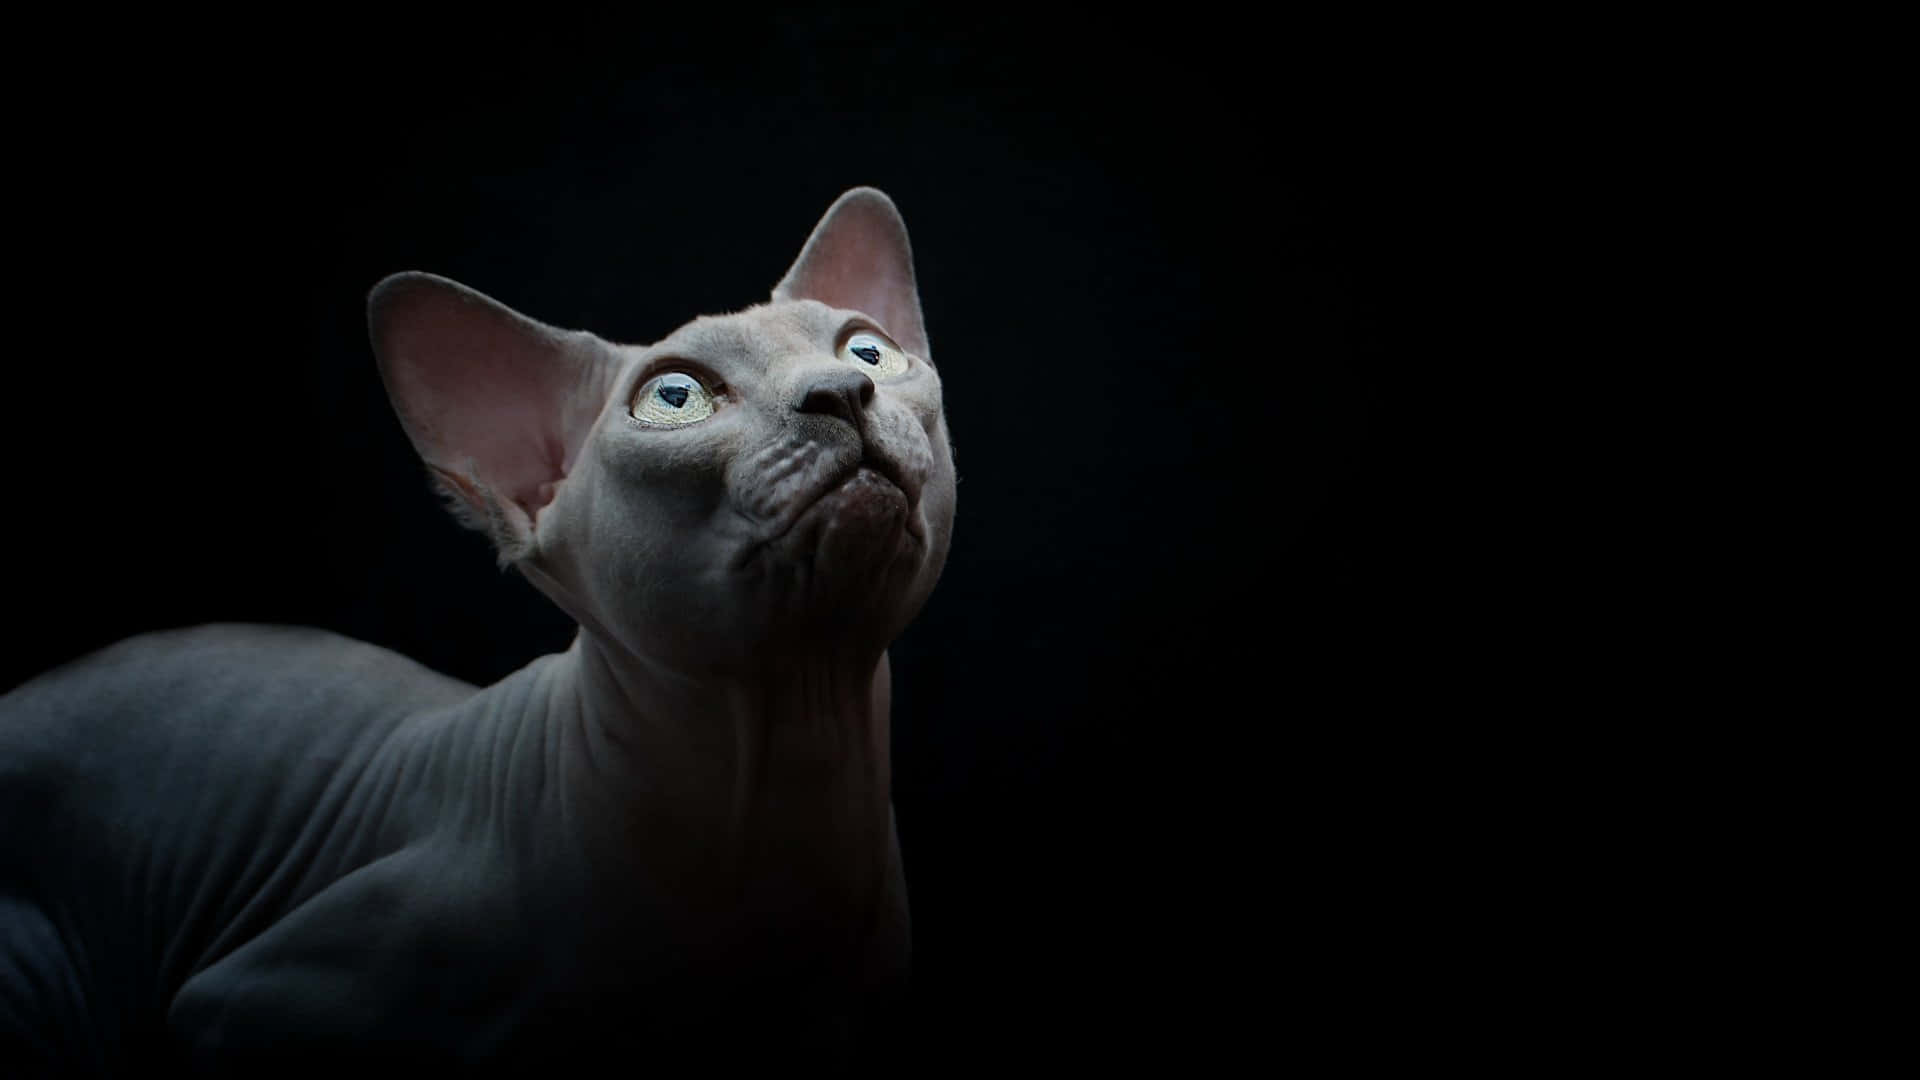 A majestic Sphynx cat posing in a relaxed manner Wallpaper